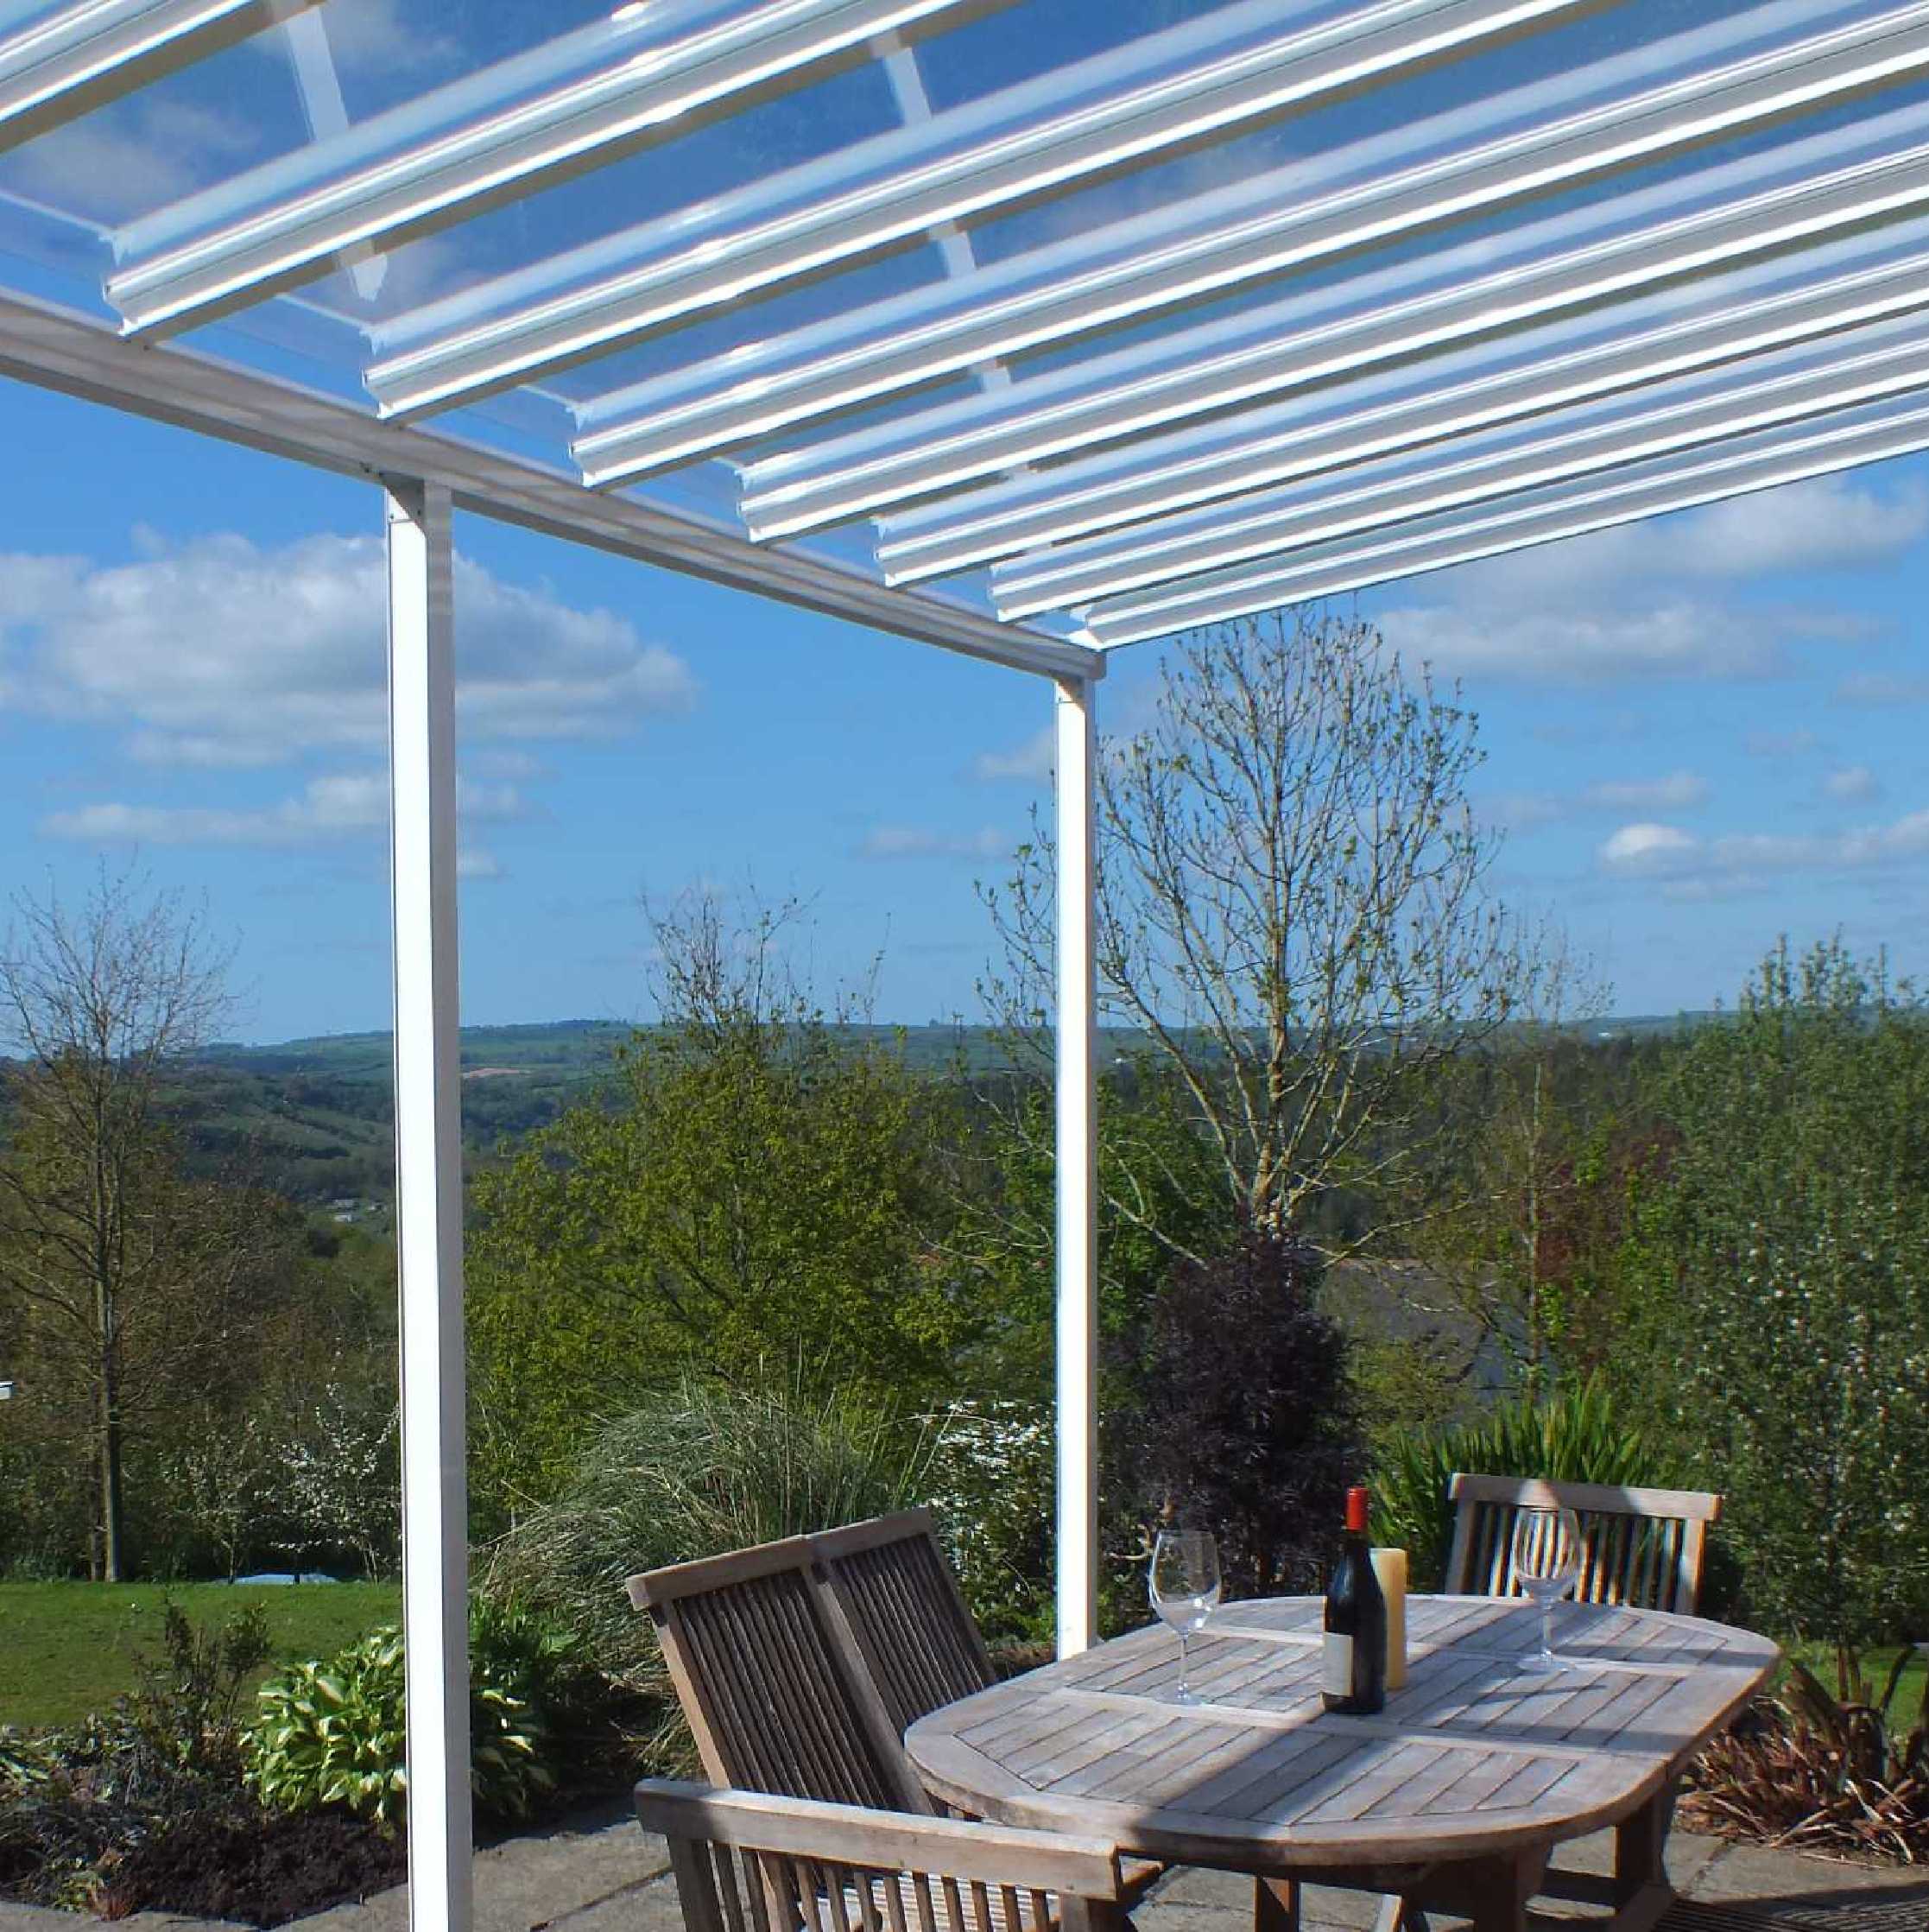 Buy Omega Smart Lean-To Canopy, White with 6mm Glass Clear Plate Polycarbonate Glazing - 2.8m (W) x 1.5m (P), (2) Supporting Posts online today